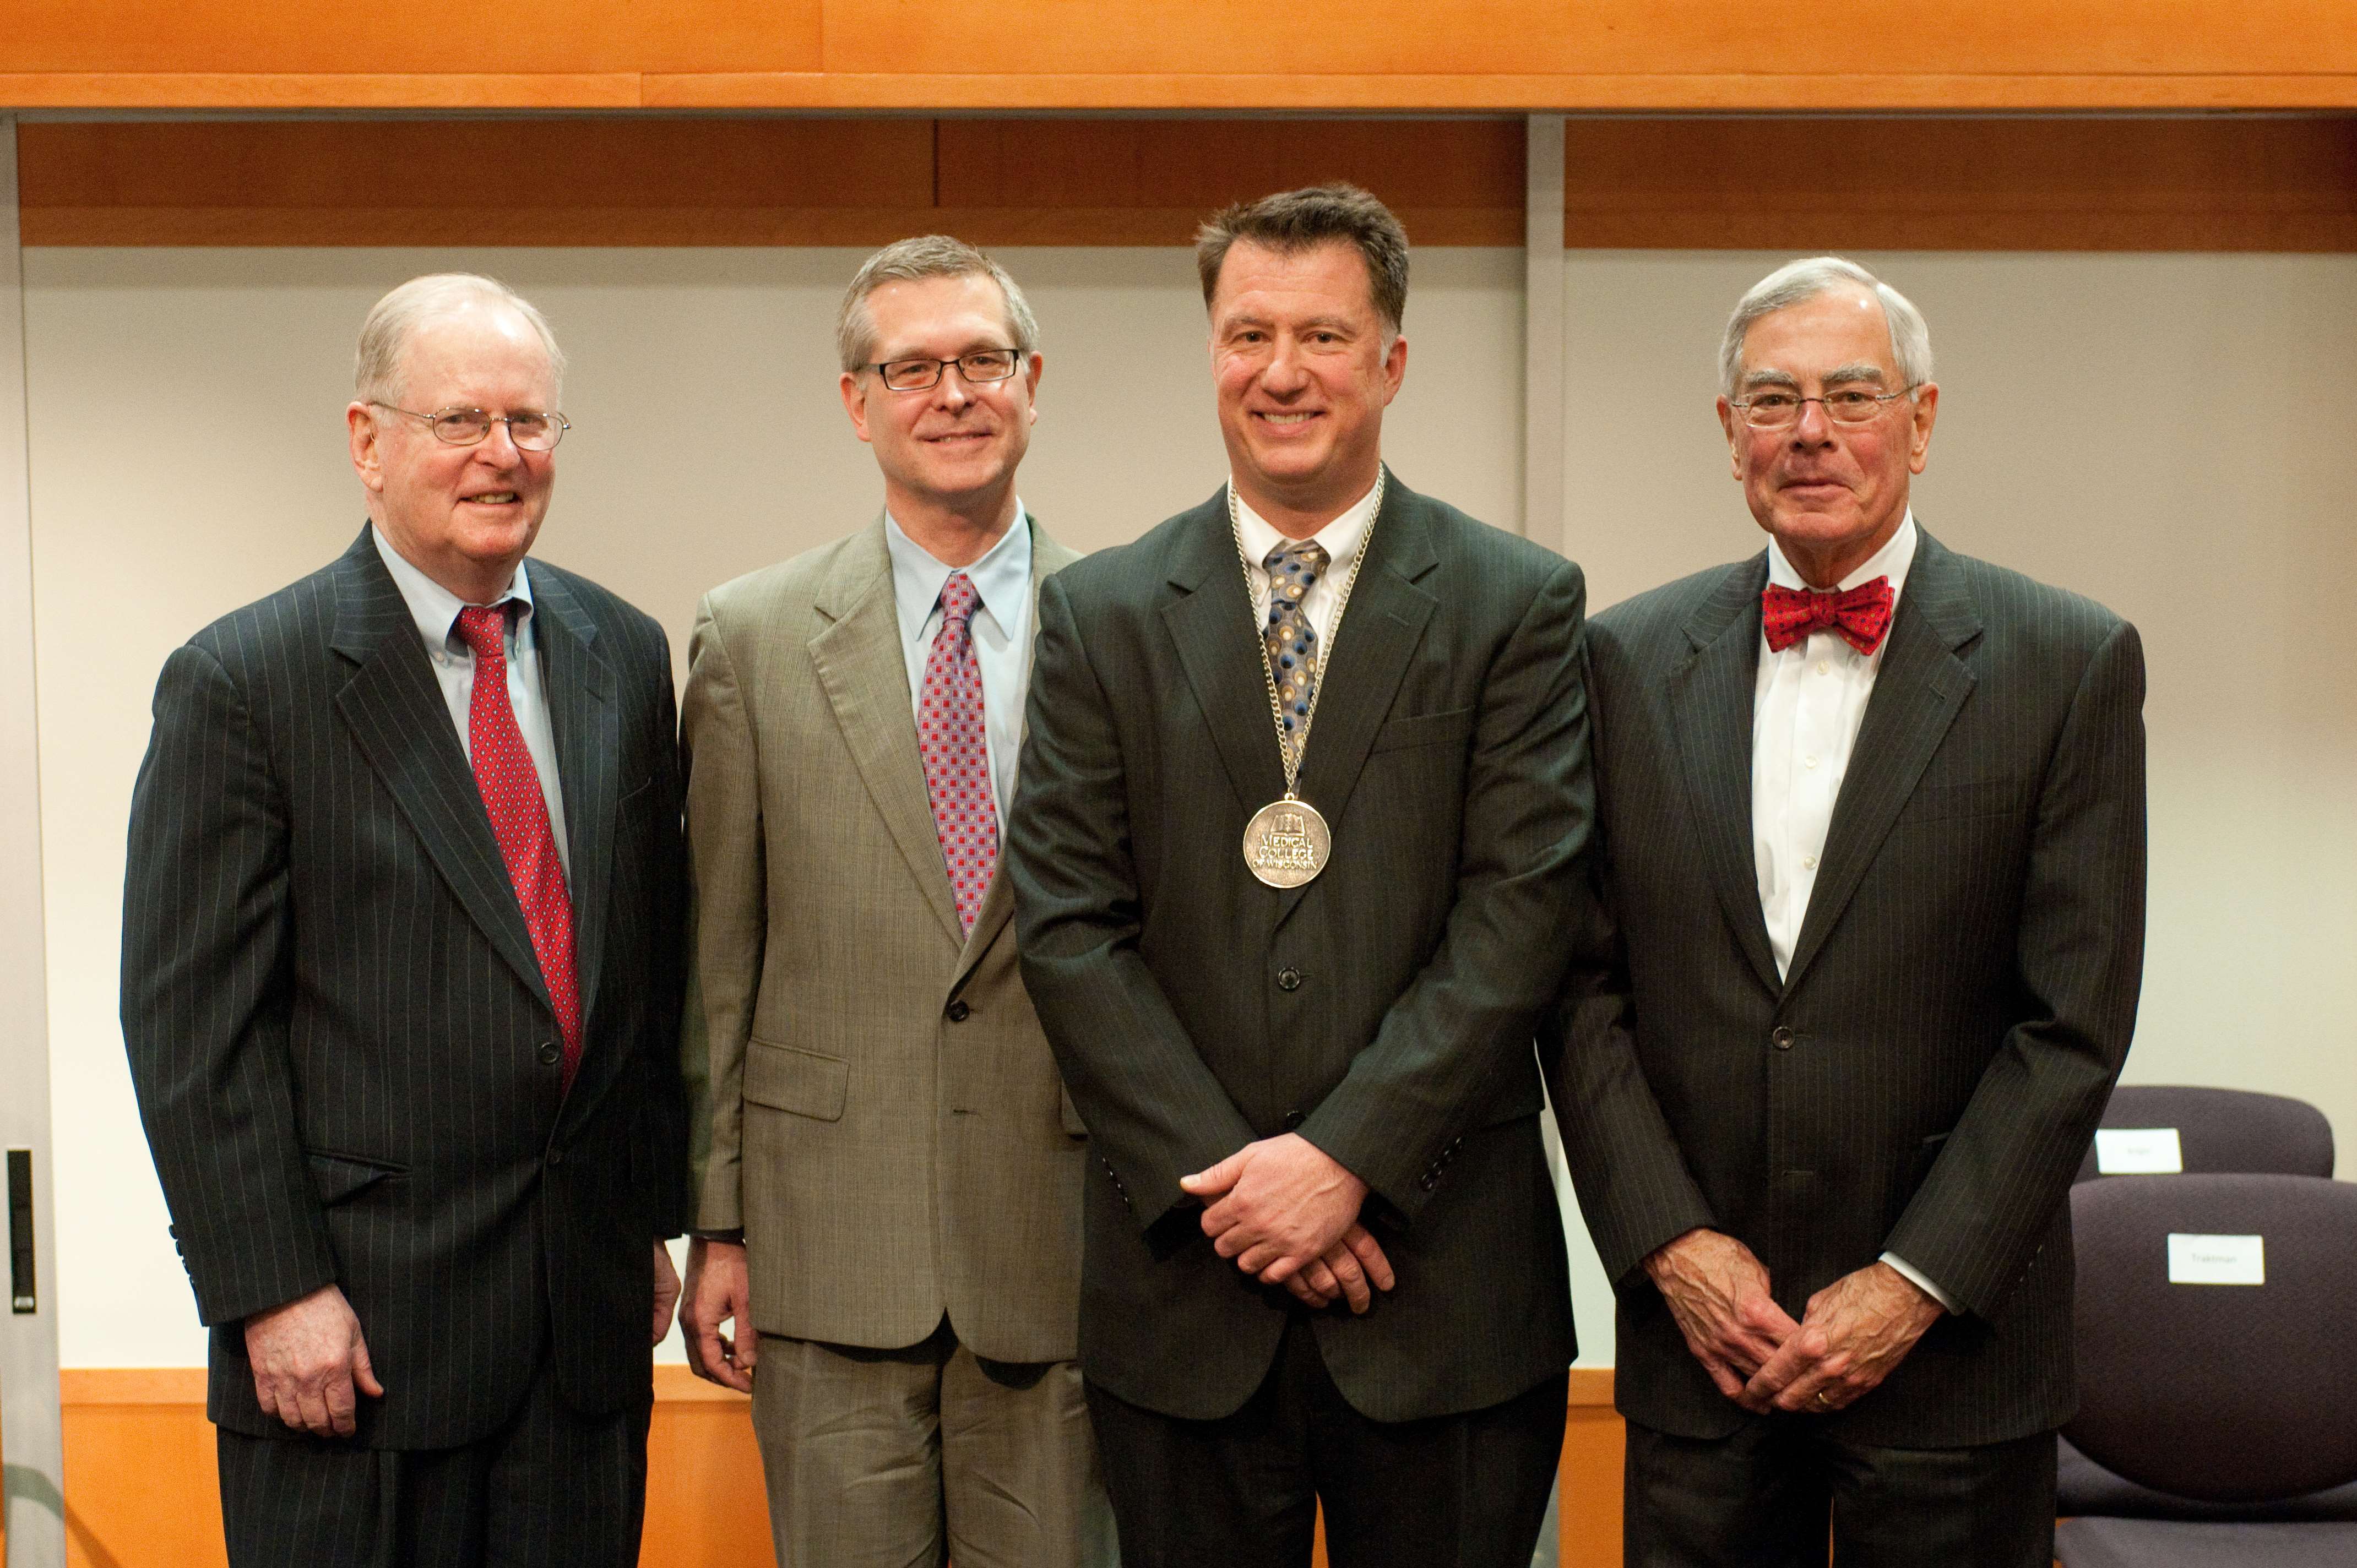 Dr. Joseph Kerschner installed as dean of the MCW School of Medicine and executive vice president in February 2012